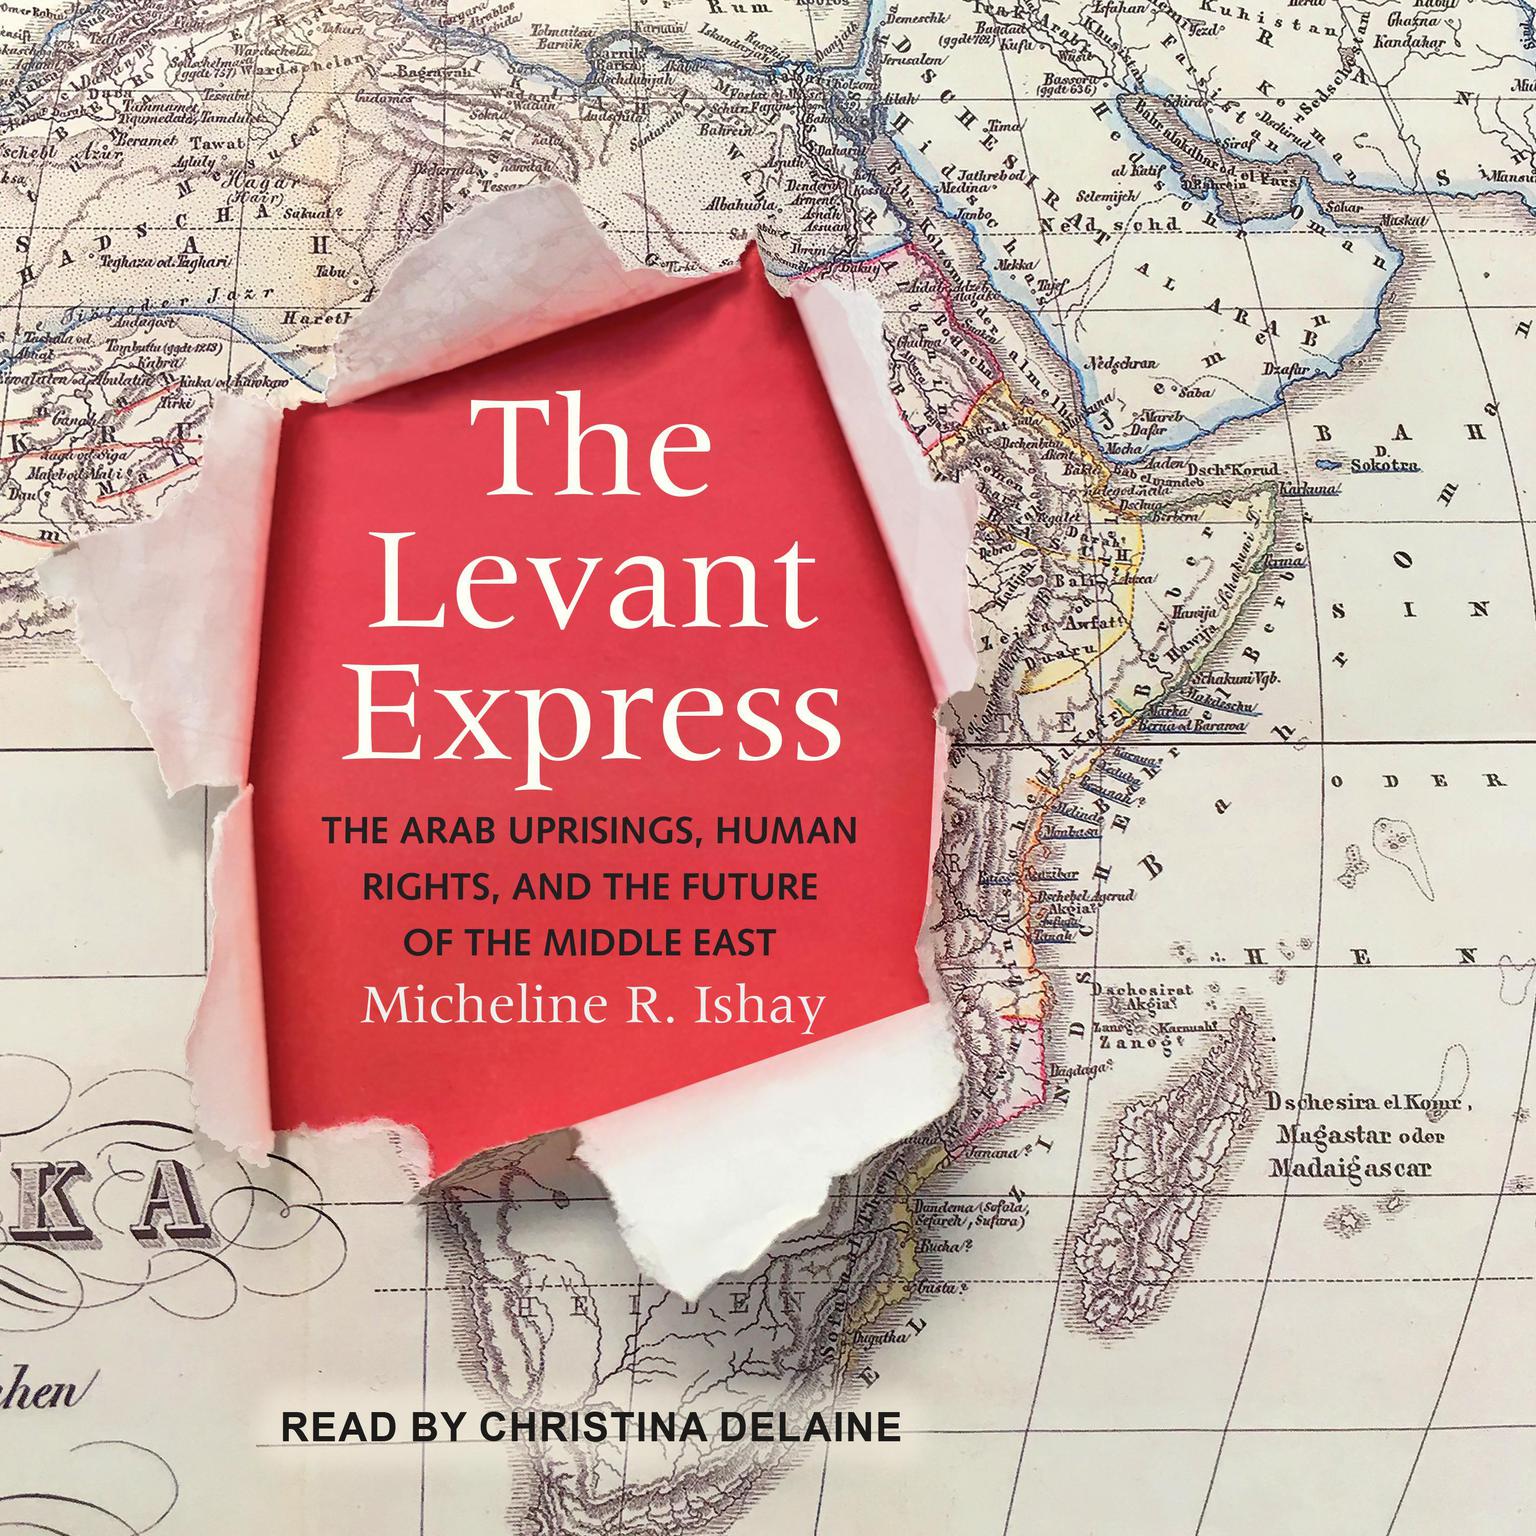 The Levant Express: The Arab Uprisings, Human Rights, and the Future of the Middle East Audiobook, by Micheline R. Ishay